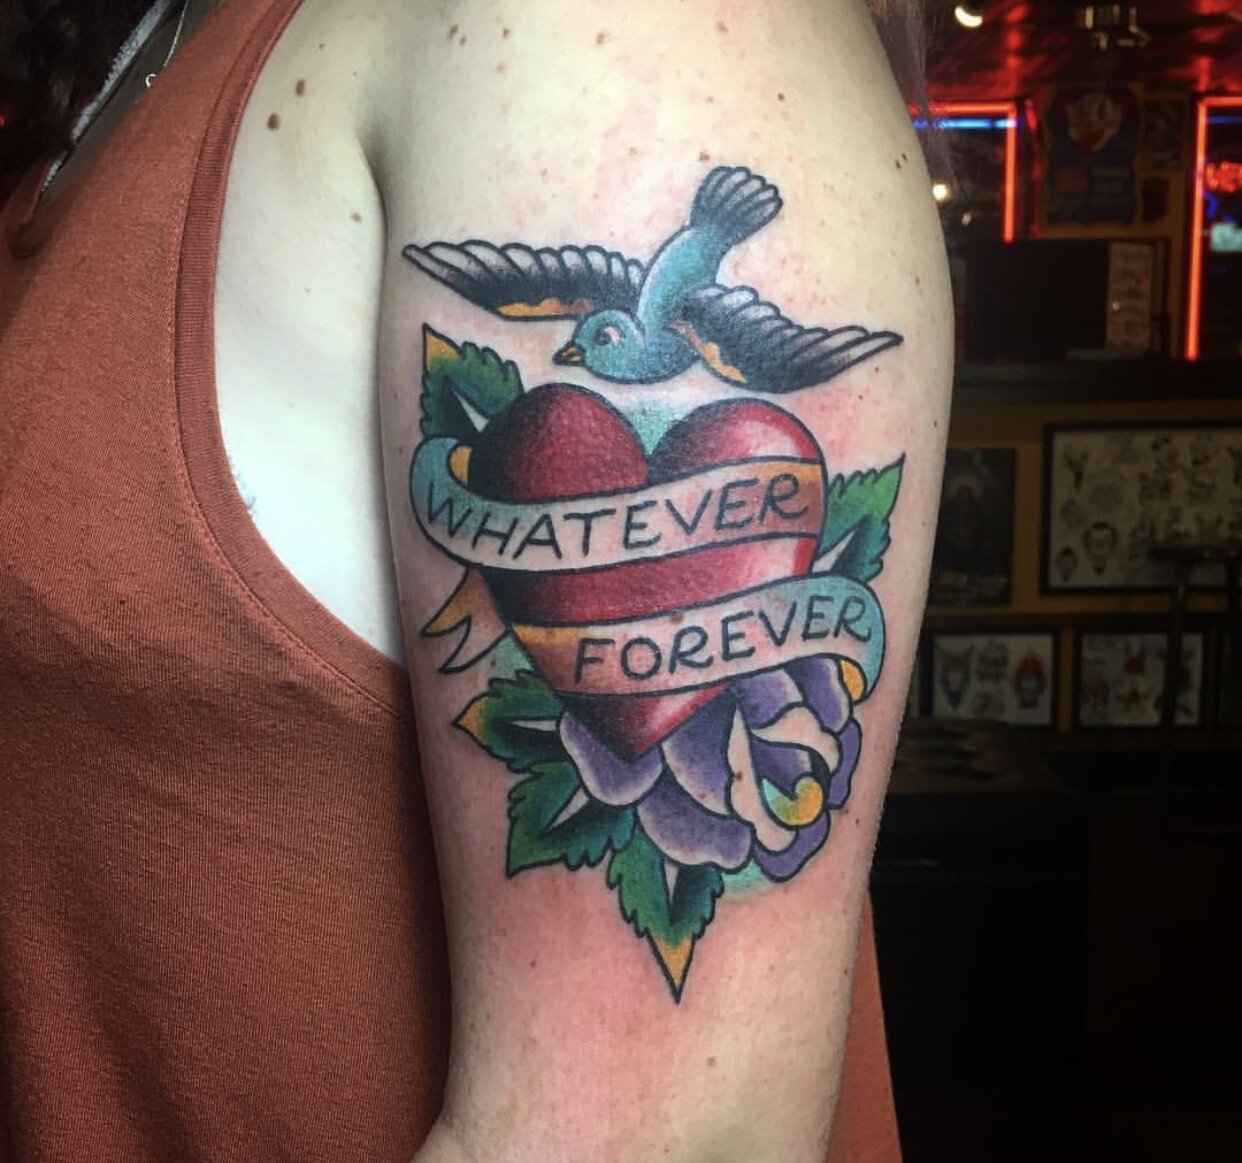 Whatever forever banner tattoo by Andrew Patch at Southern Star Tattoo in Atlanta, Georgia.